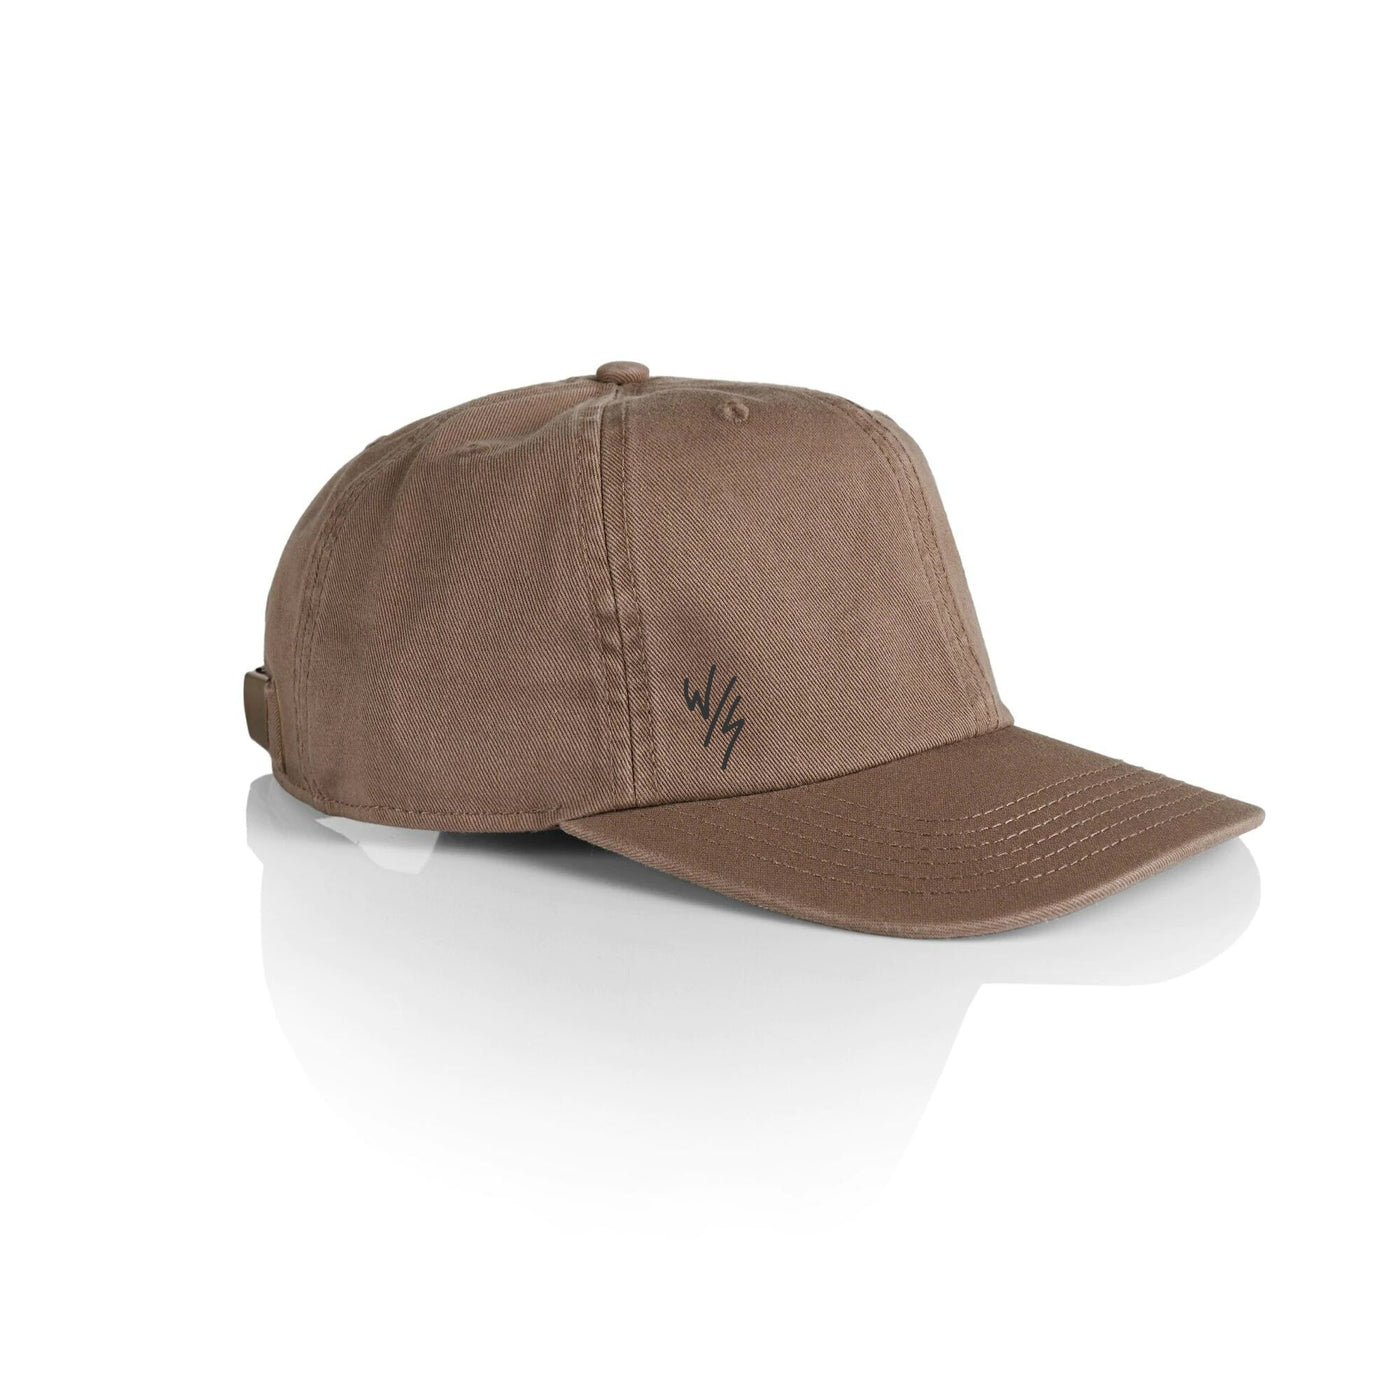 W/S CAP - COFFEE - Wittering Surf Shop